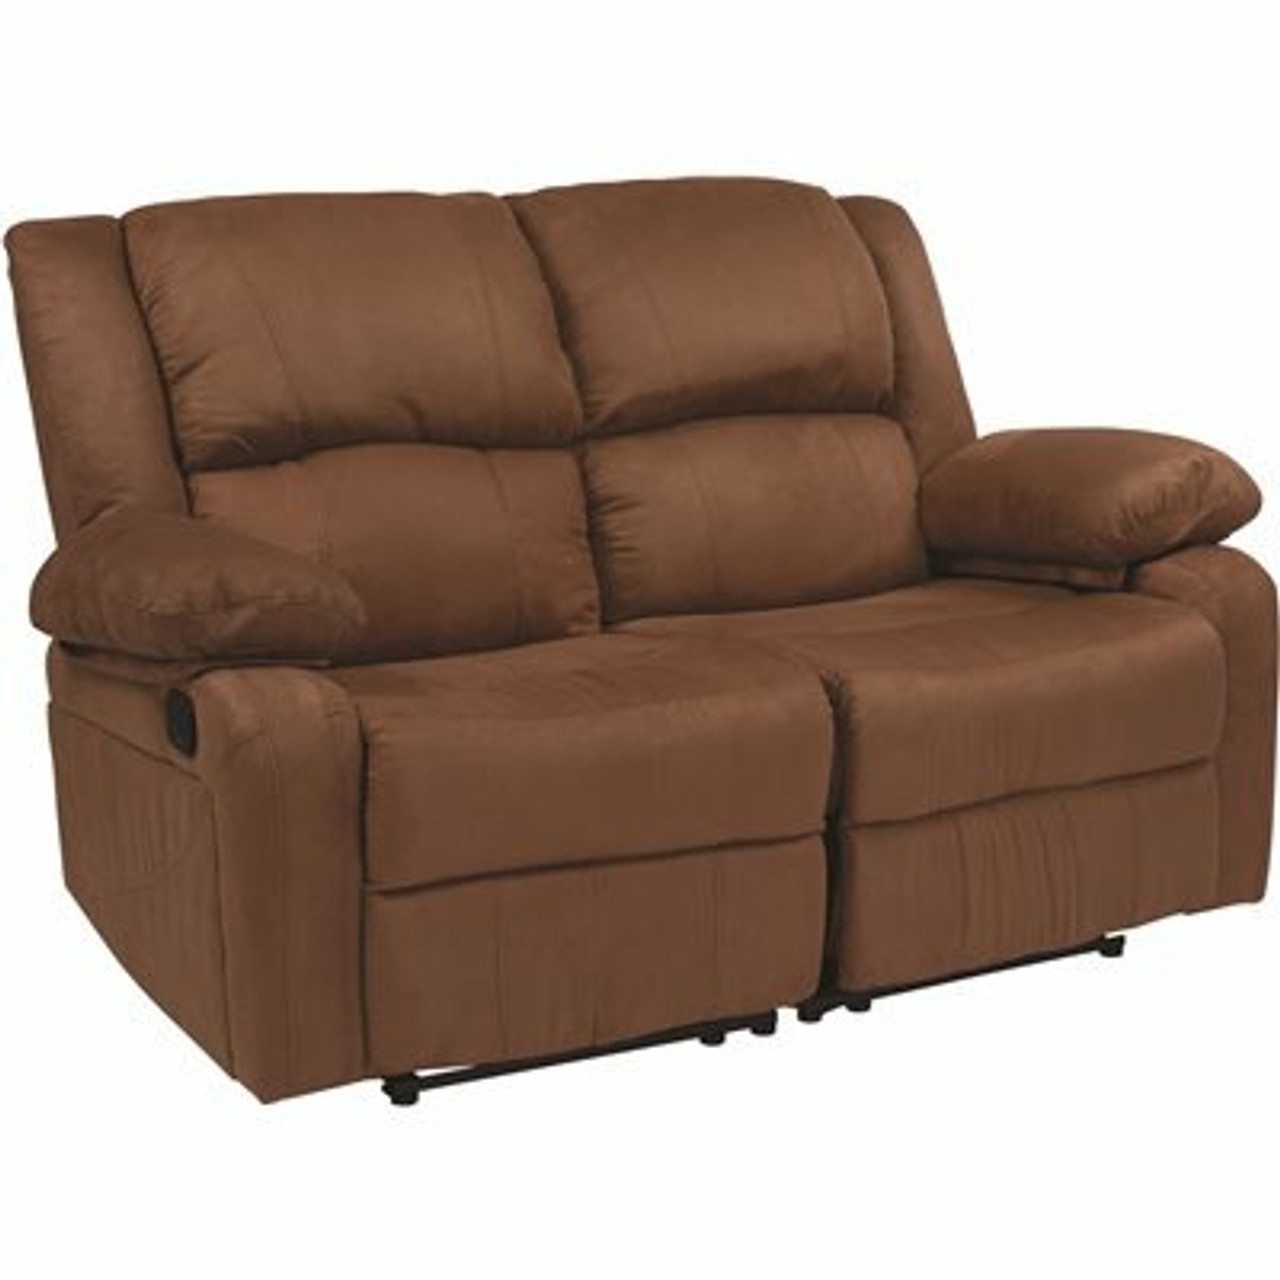 Carnegy Avenue 56 In. Chocolate Brown Faux Leather 2-Seater Reclining Loveseat With Flared Arms